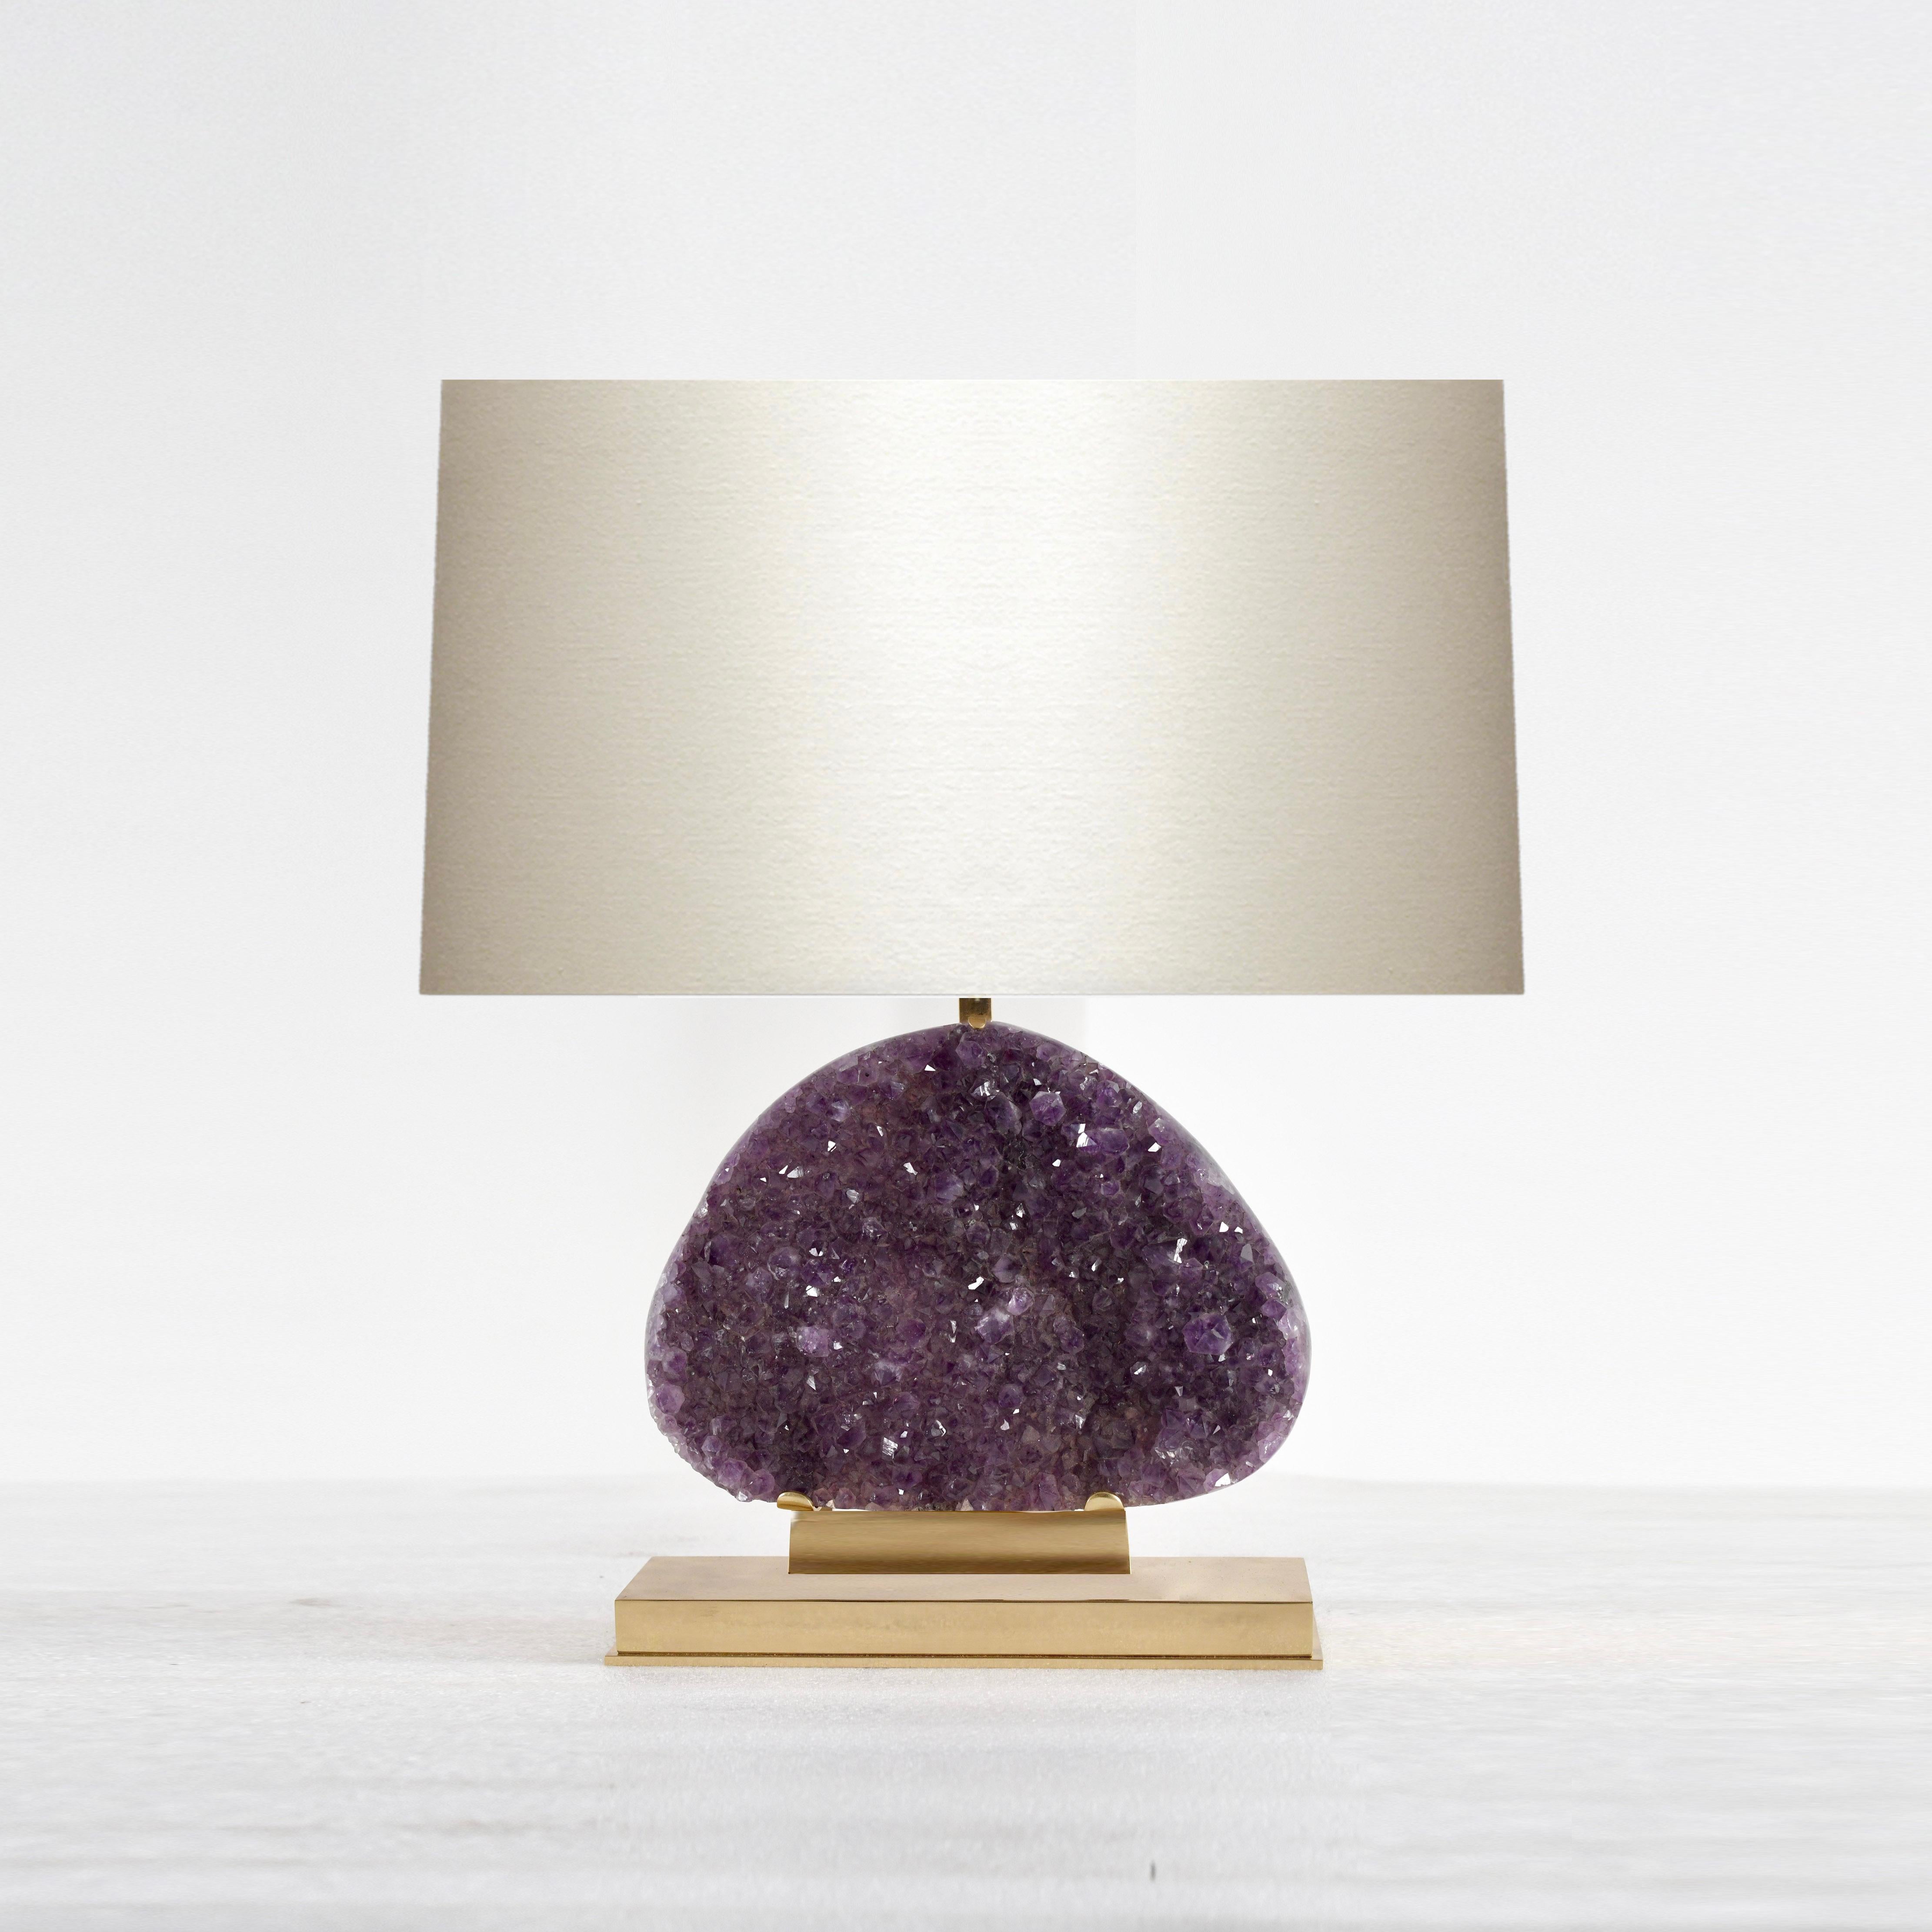 Amethyst geode cluster lamps. Mount is the lamp and the base is polished brass. Created by Phoenix Gallery NYC.
Top of the agate 11.5